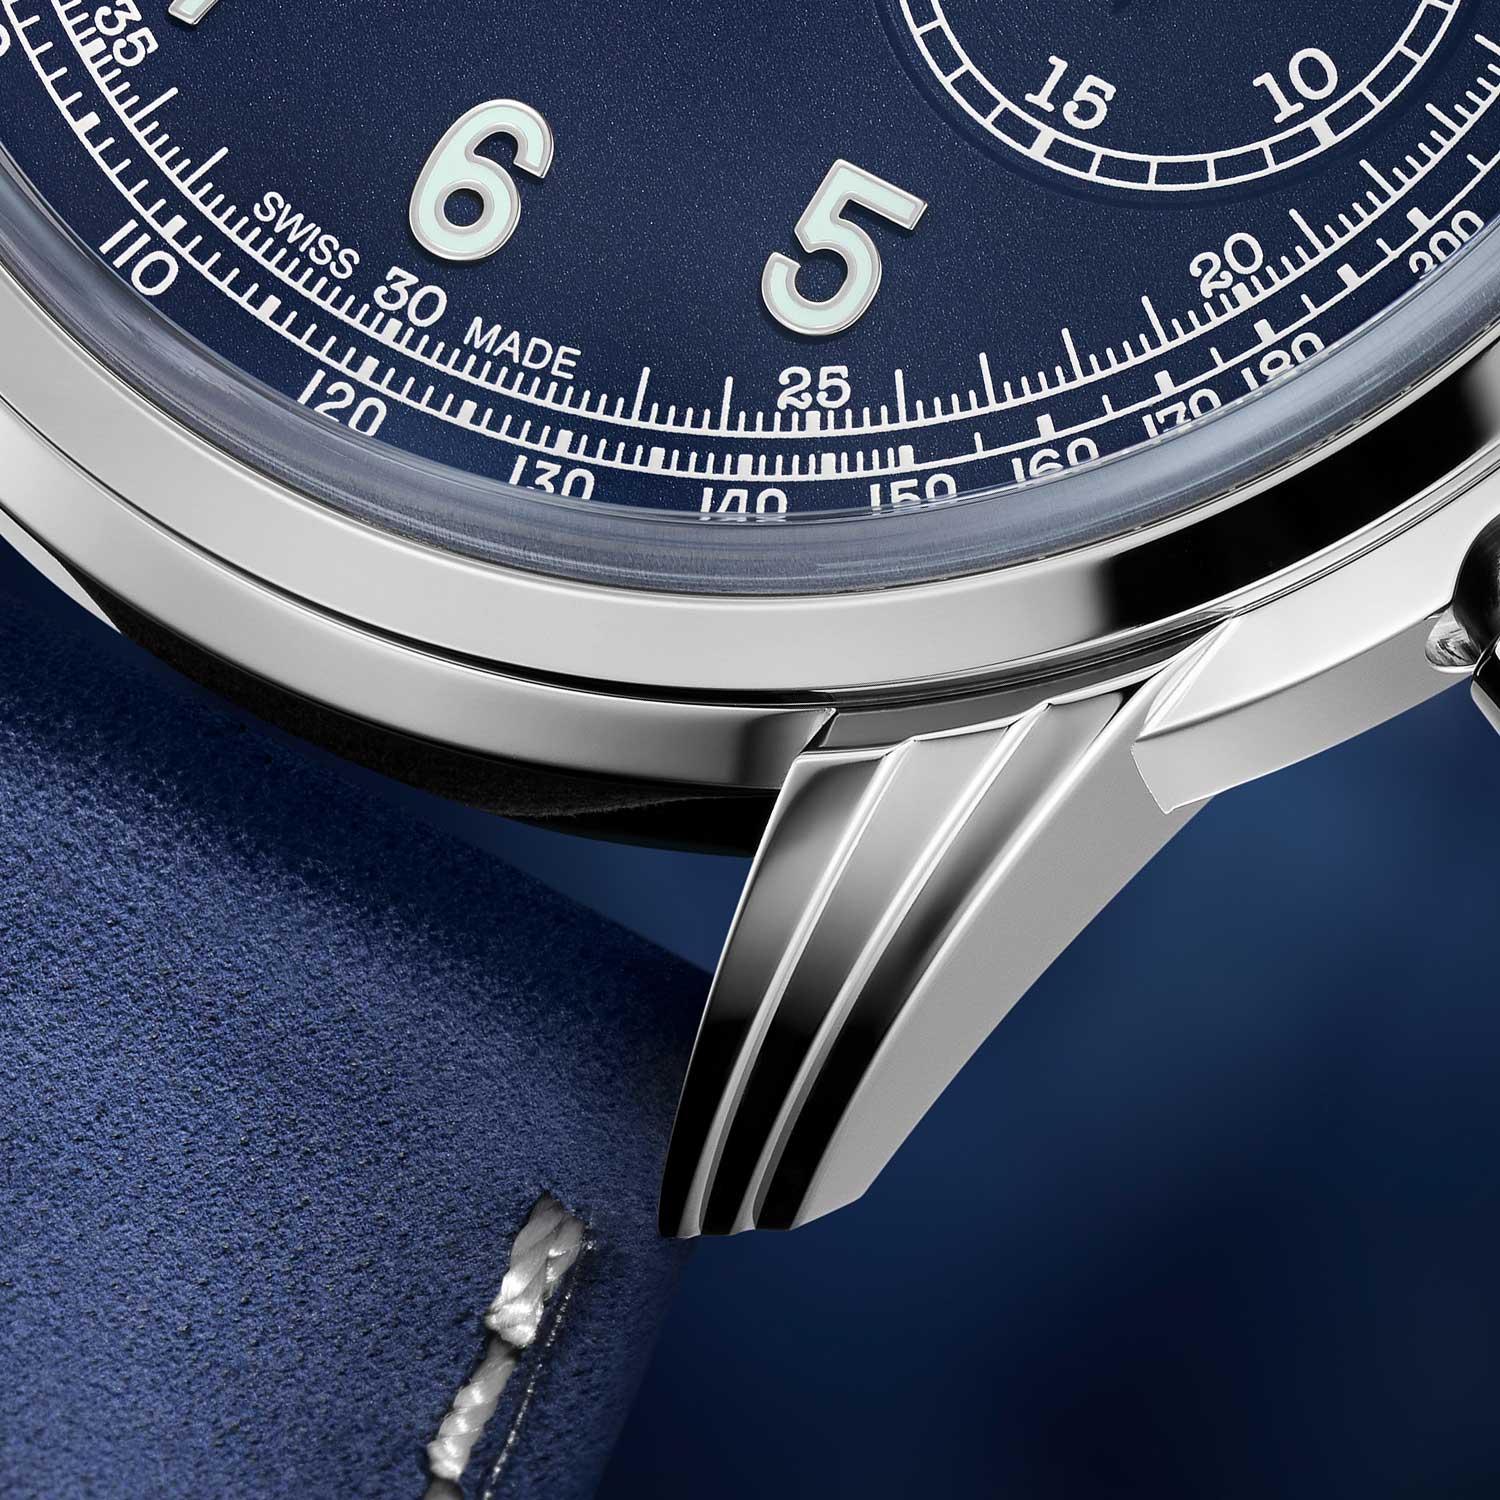 The triple-stepped lugs of the Ref. 5172G-001